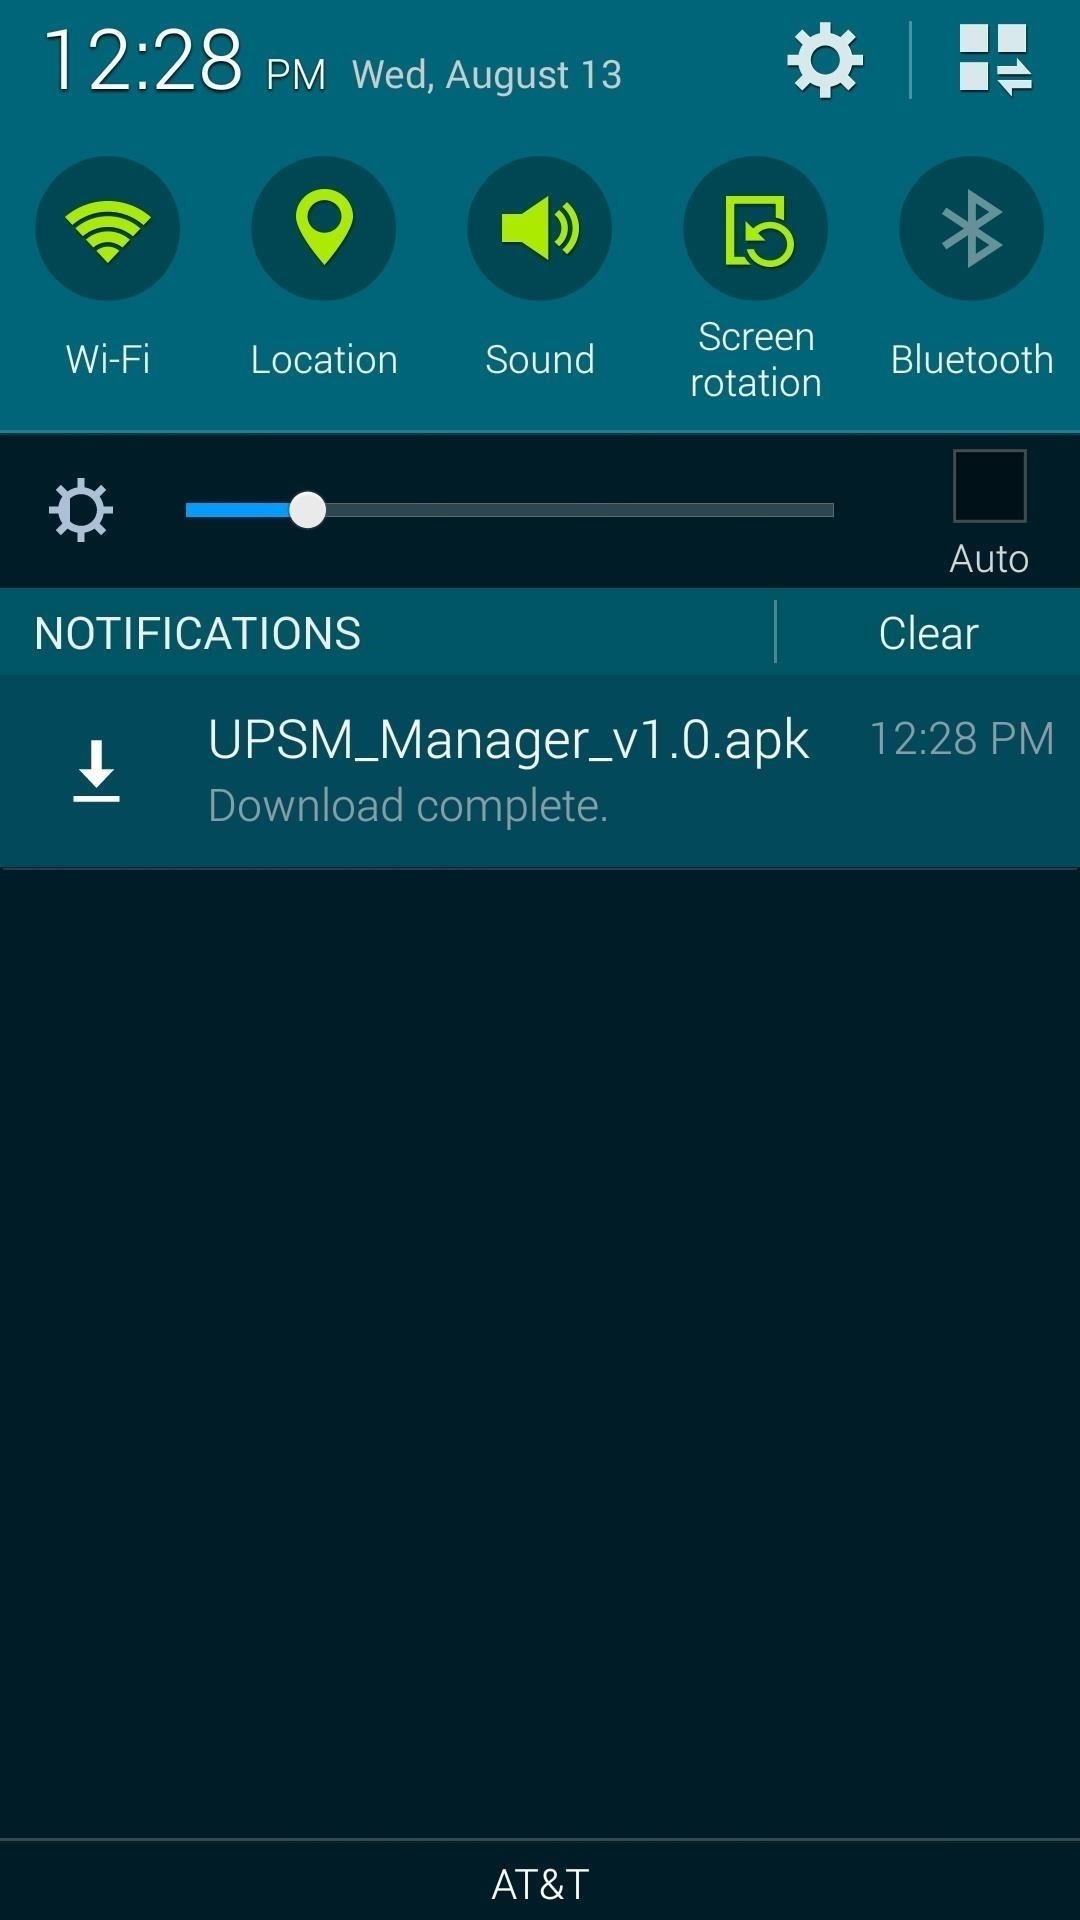 Add Any Apps to Ultra Power-Saving Mode on the Galaxy S5